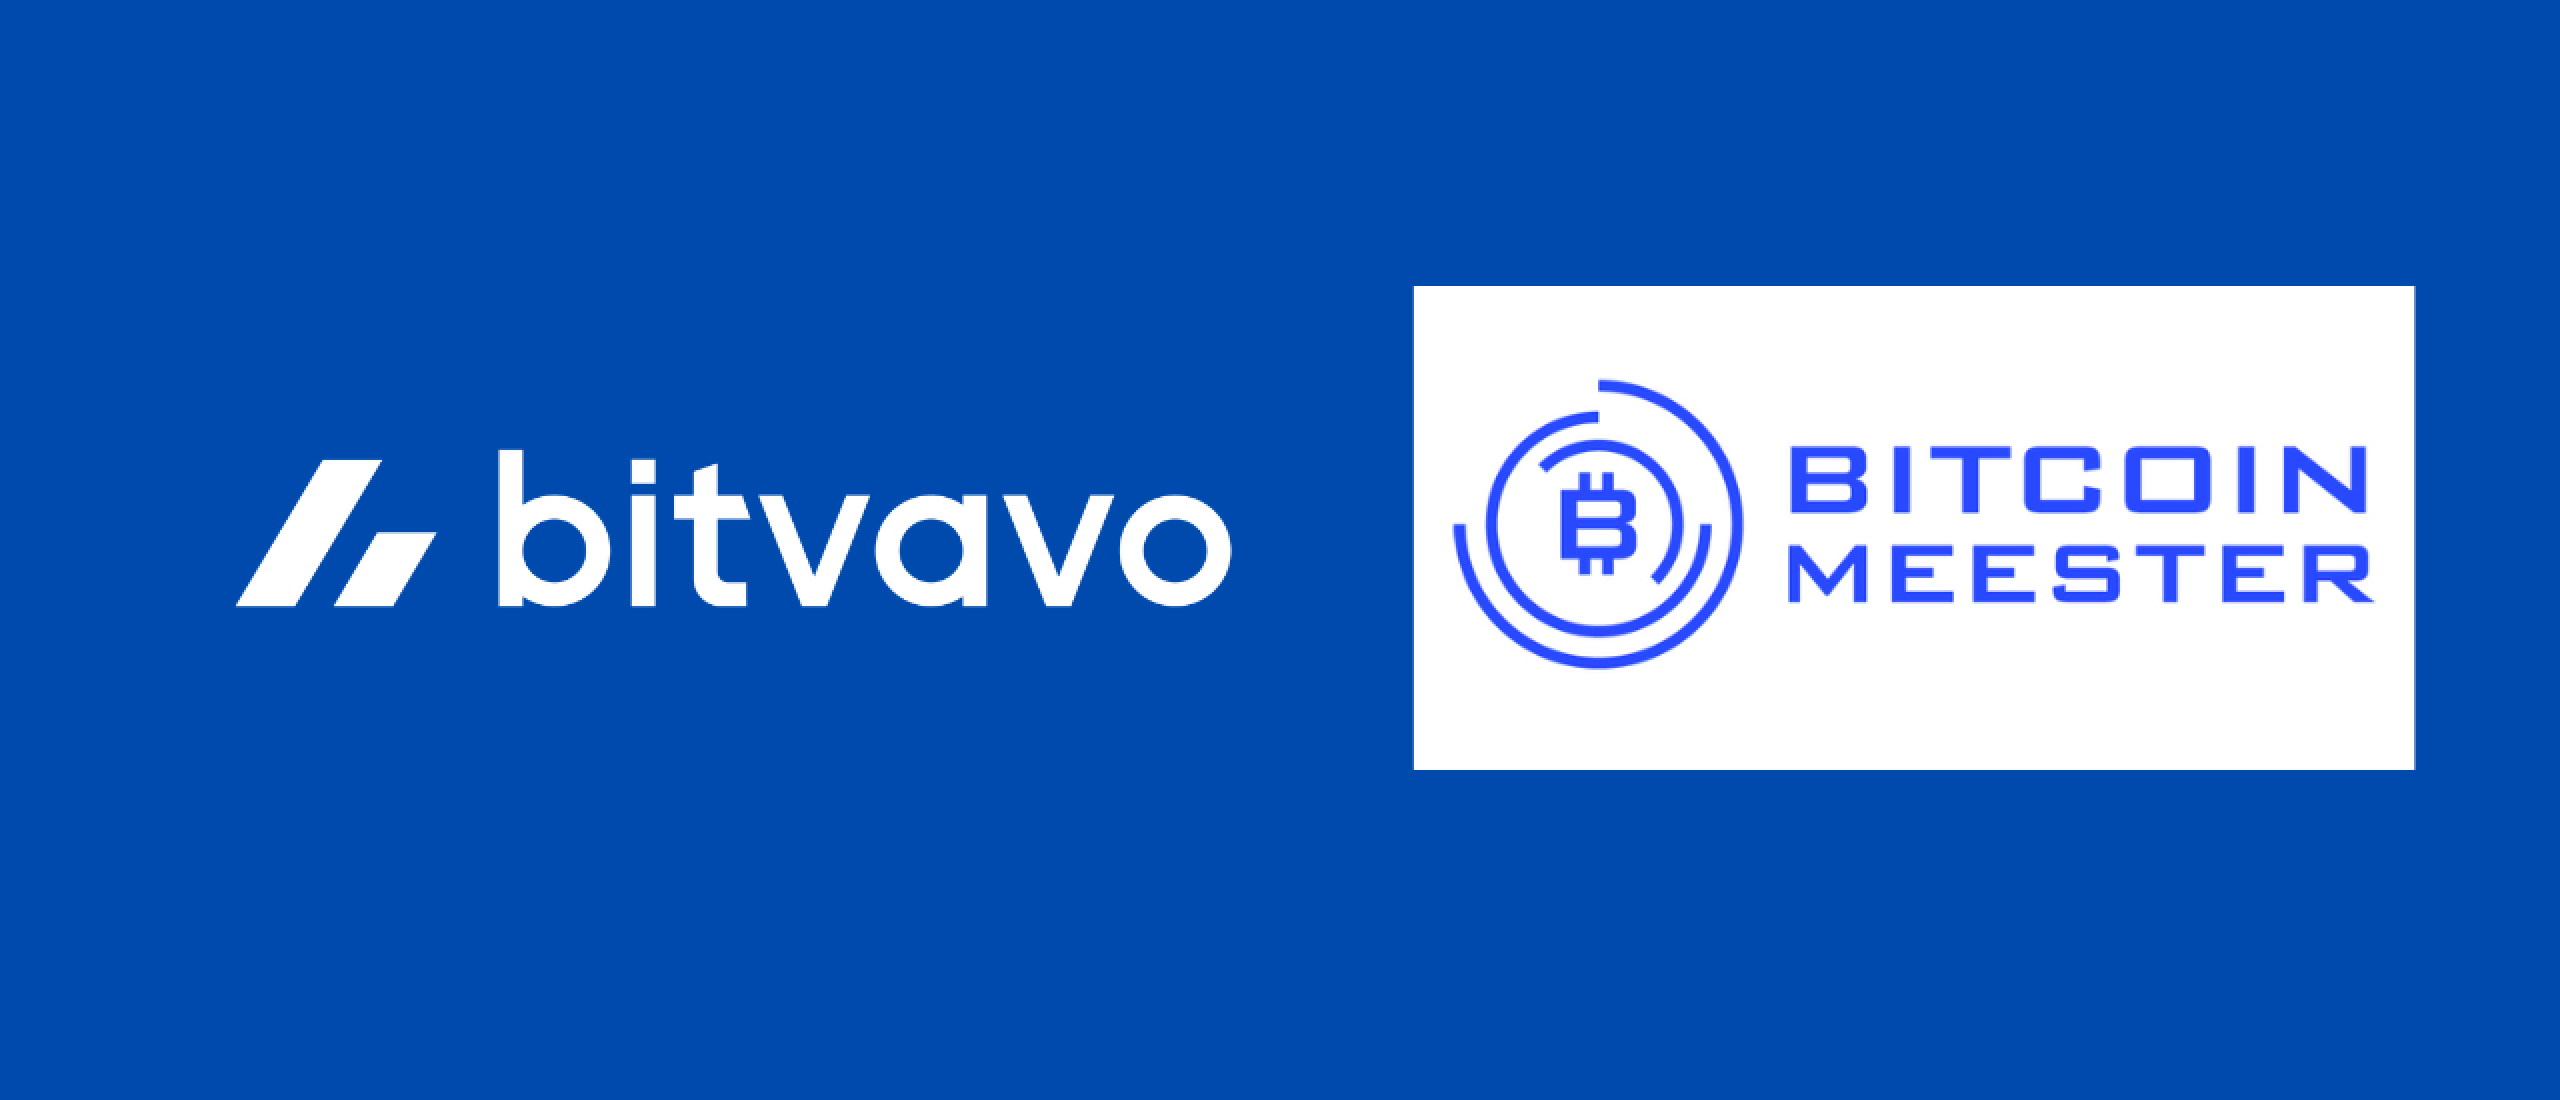 Bitvavo of Bitcoin Meester?